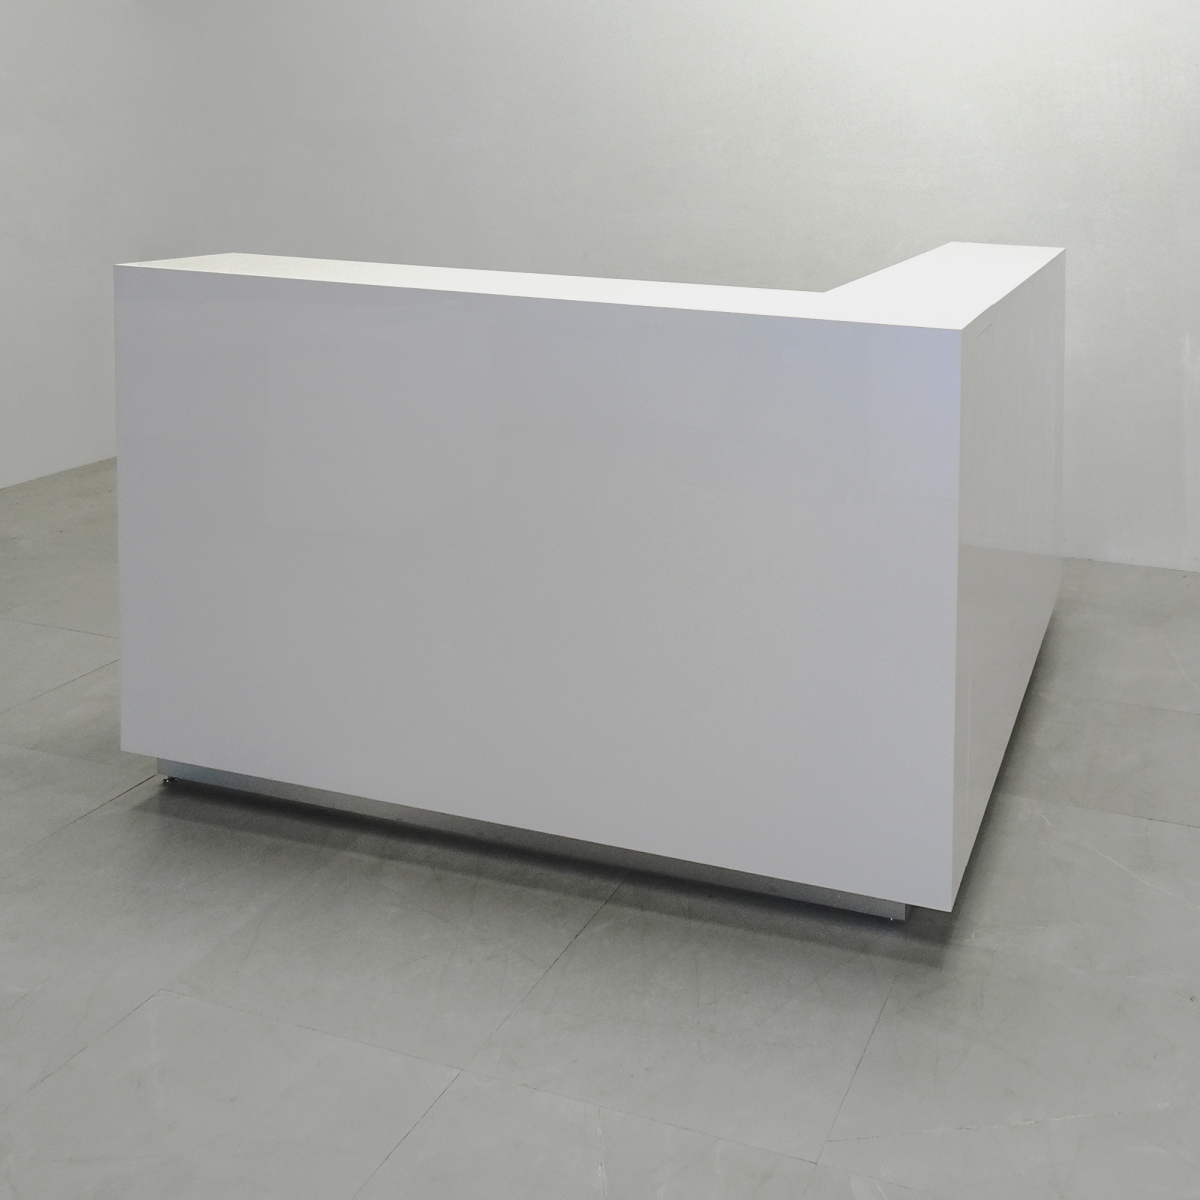 Custom L-Shape Reception Desk in White Gloss, 72 By 72 Inches